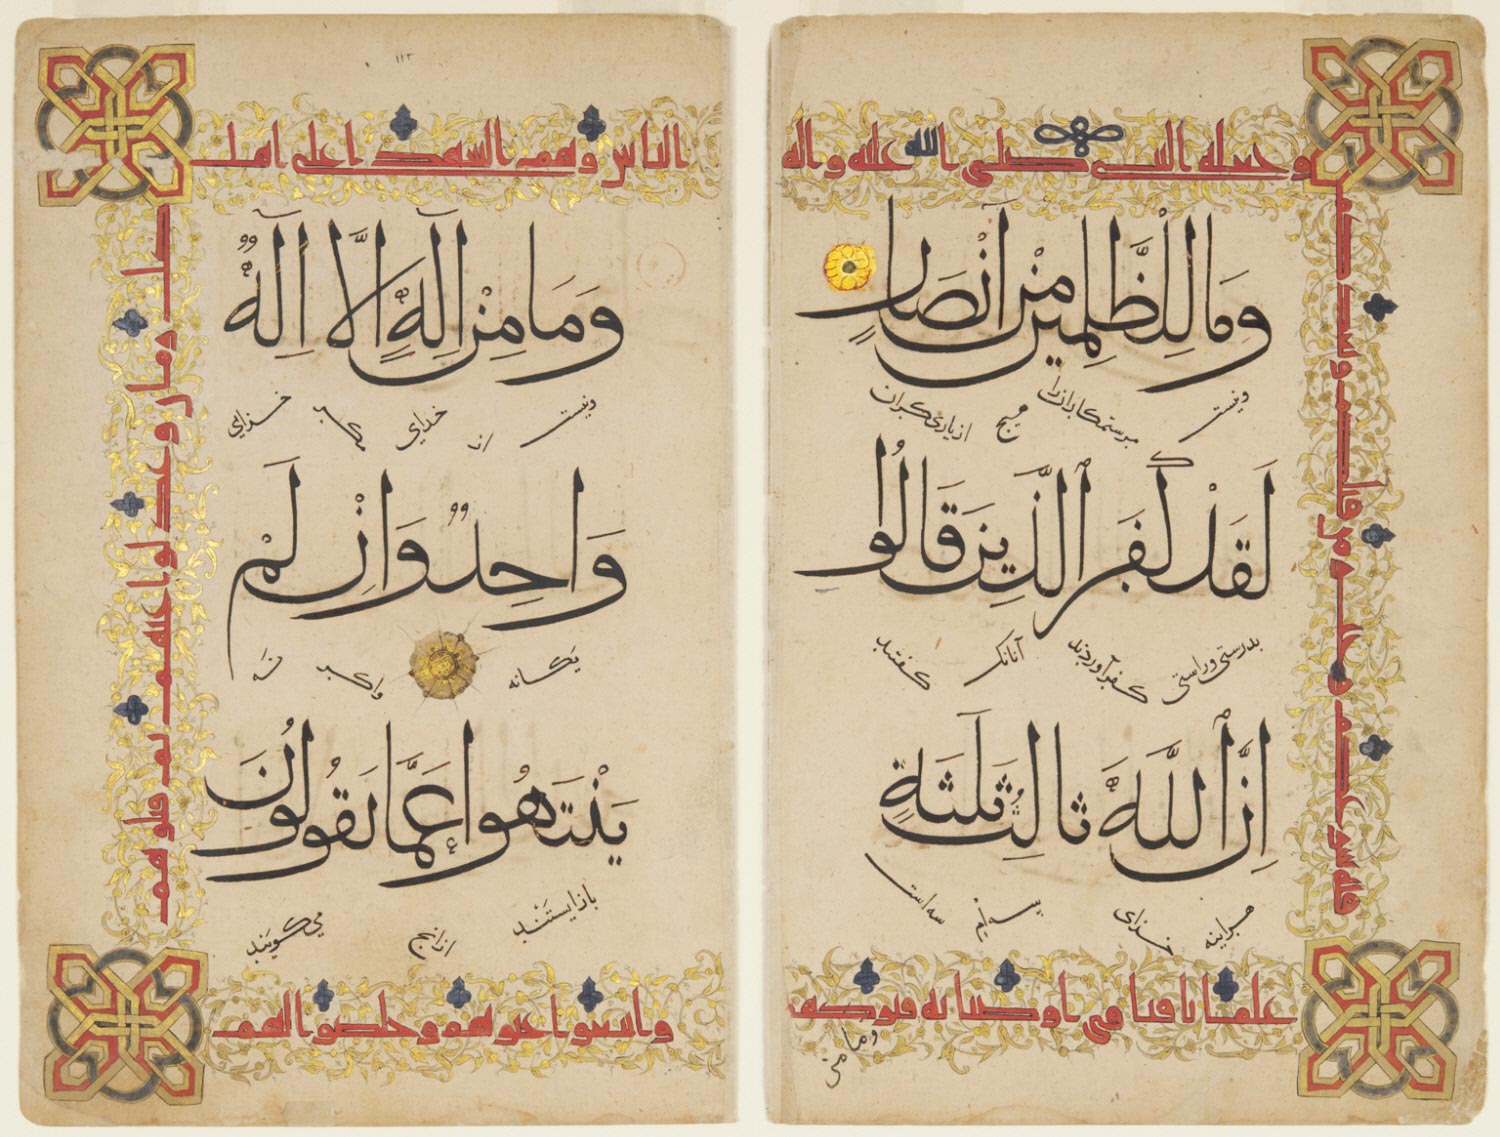 Double Folio from a Qur'an, Turkey